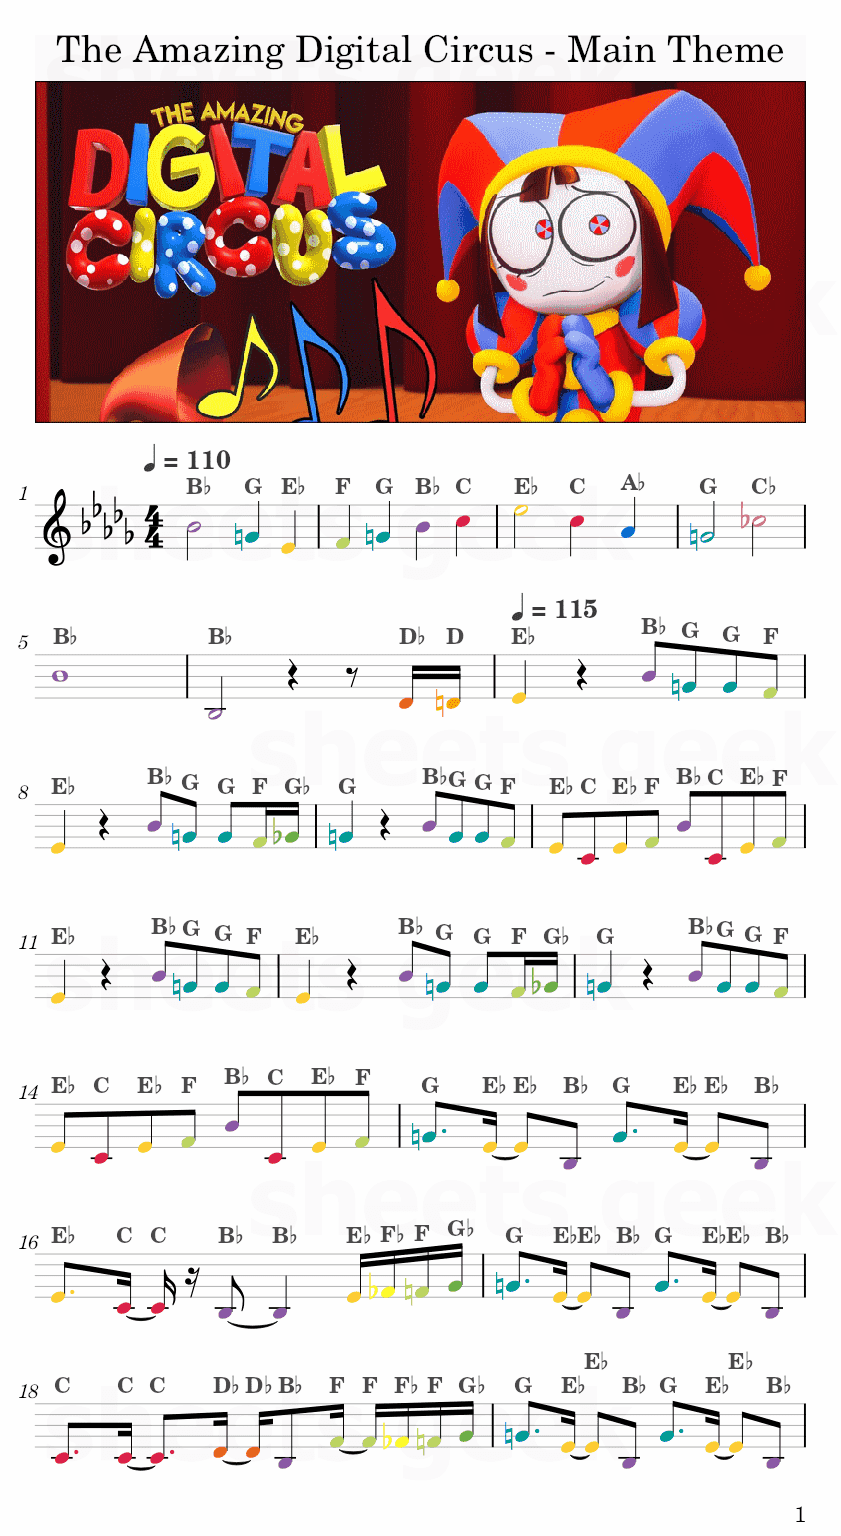 The Amazing Digital Circus - Main Theme Easy Sheet Music Free for piano, keyboard, flute, violin, sax, cello page 1